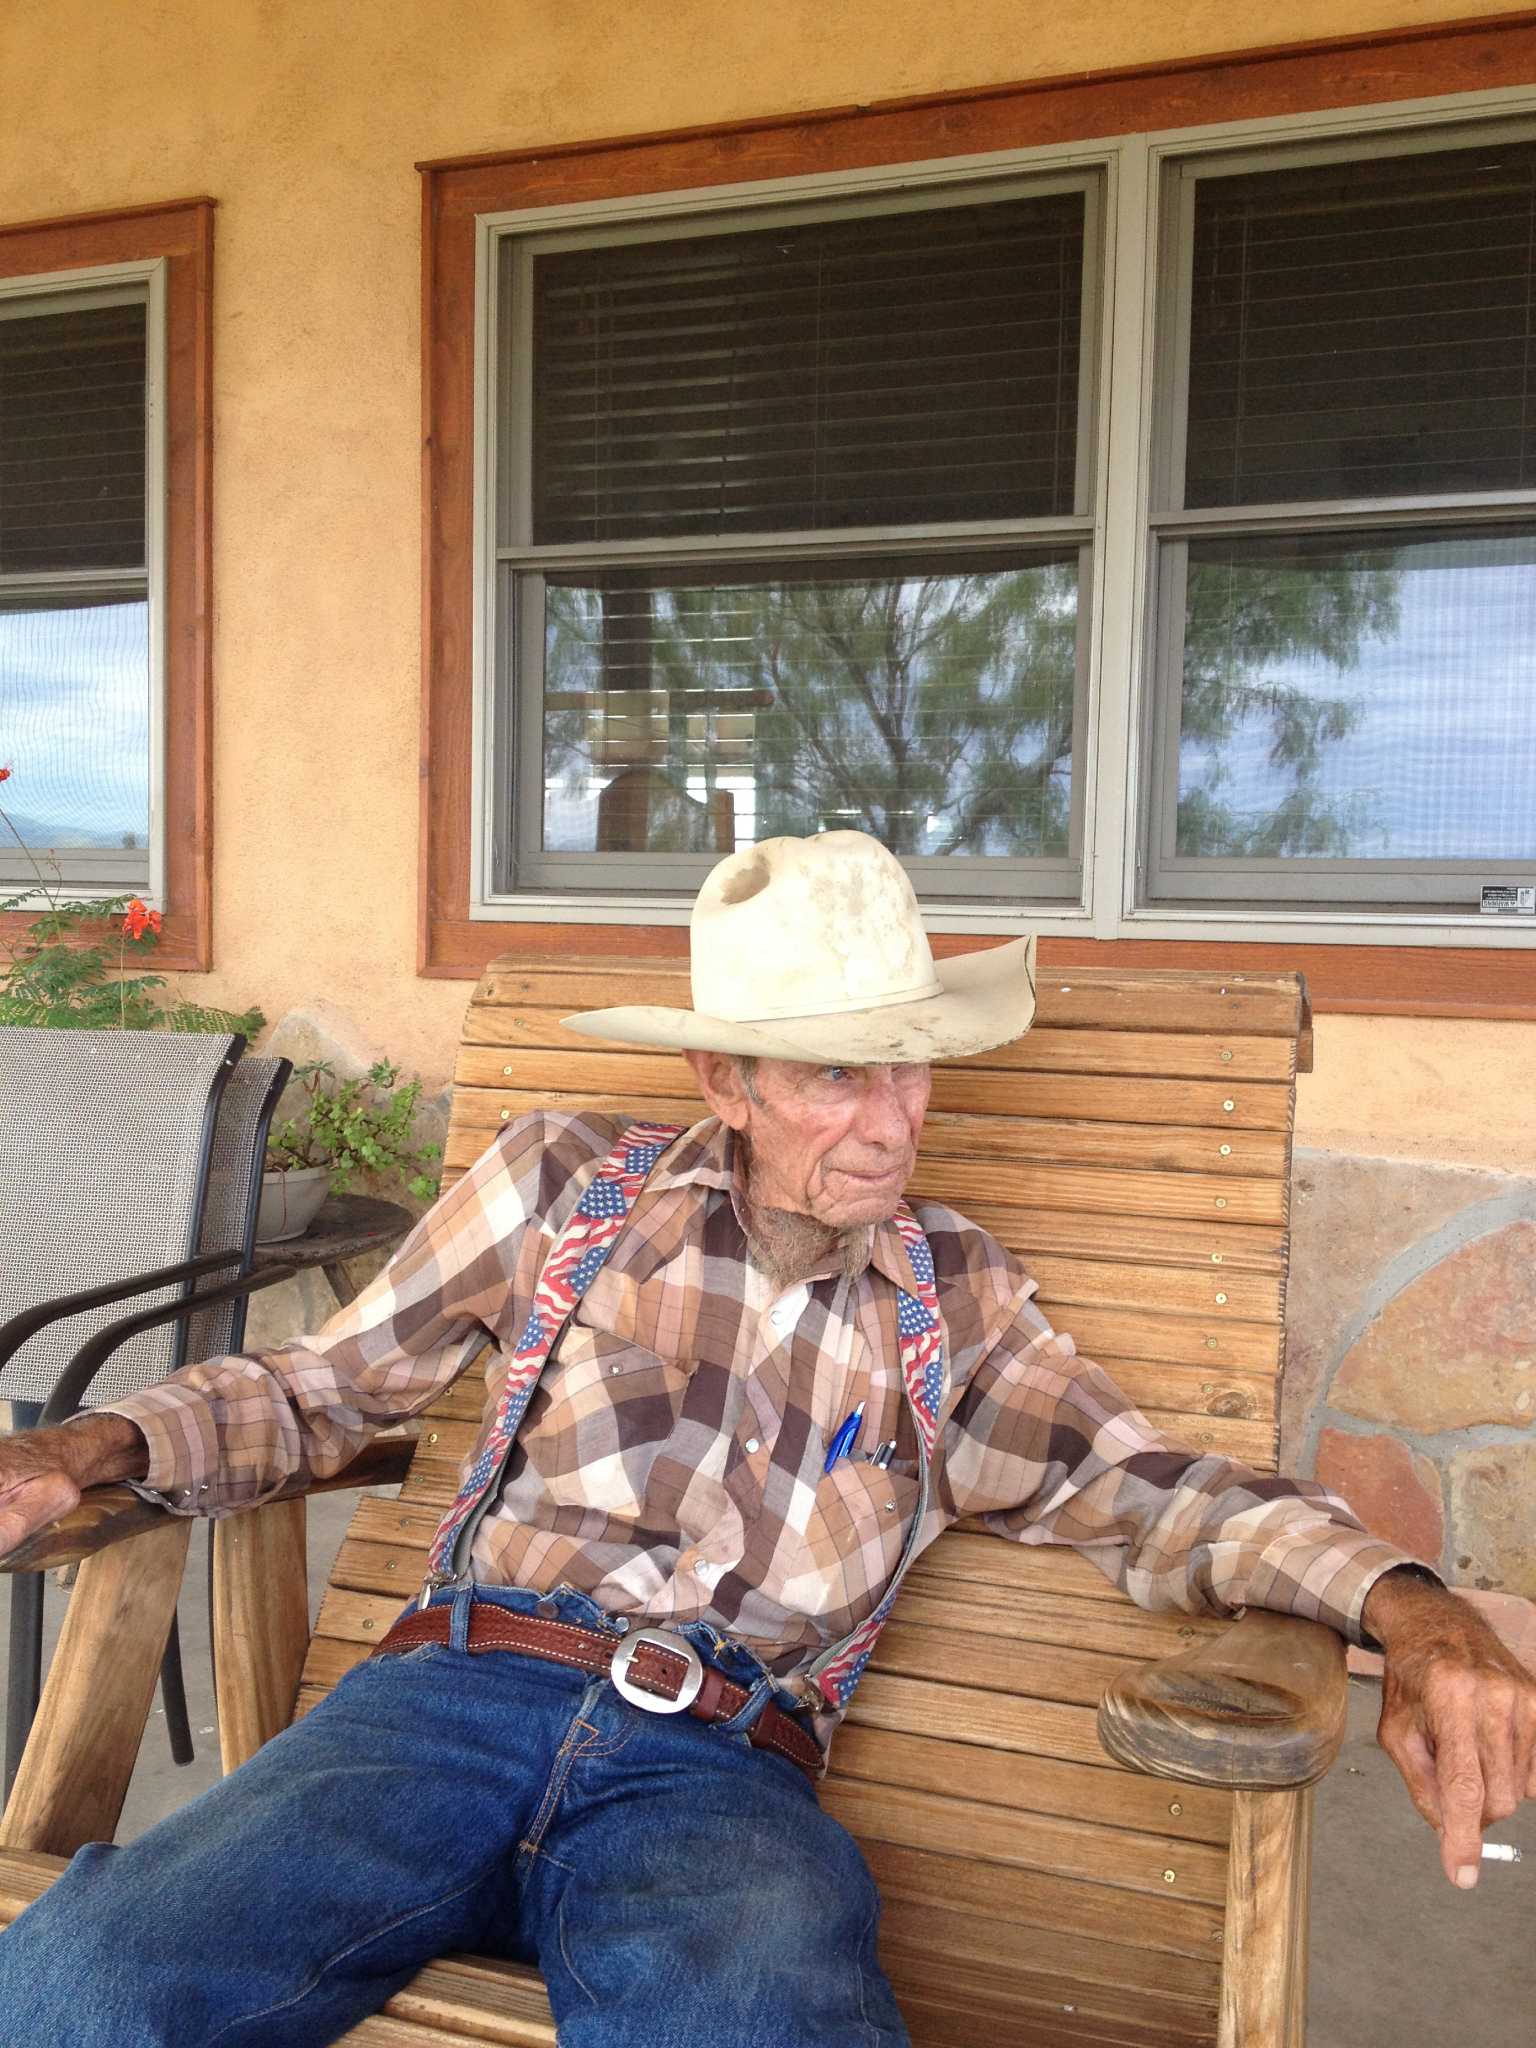 Old-time cowboy may be bent, but he's still unbroken